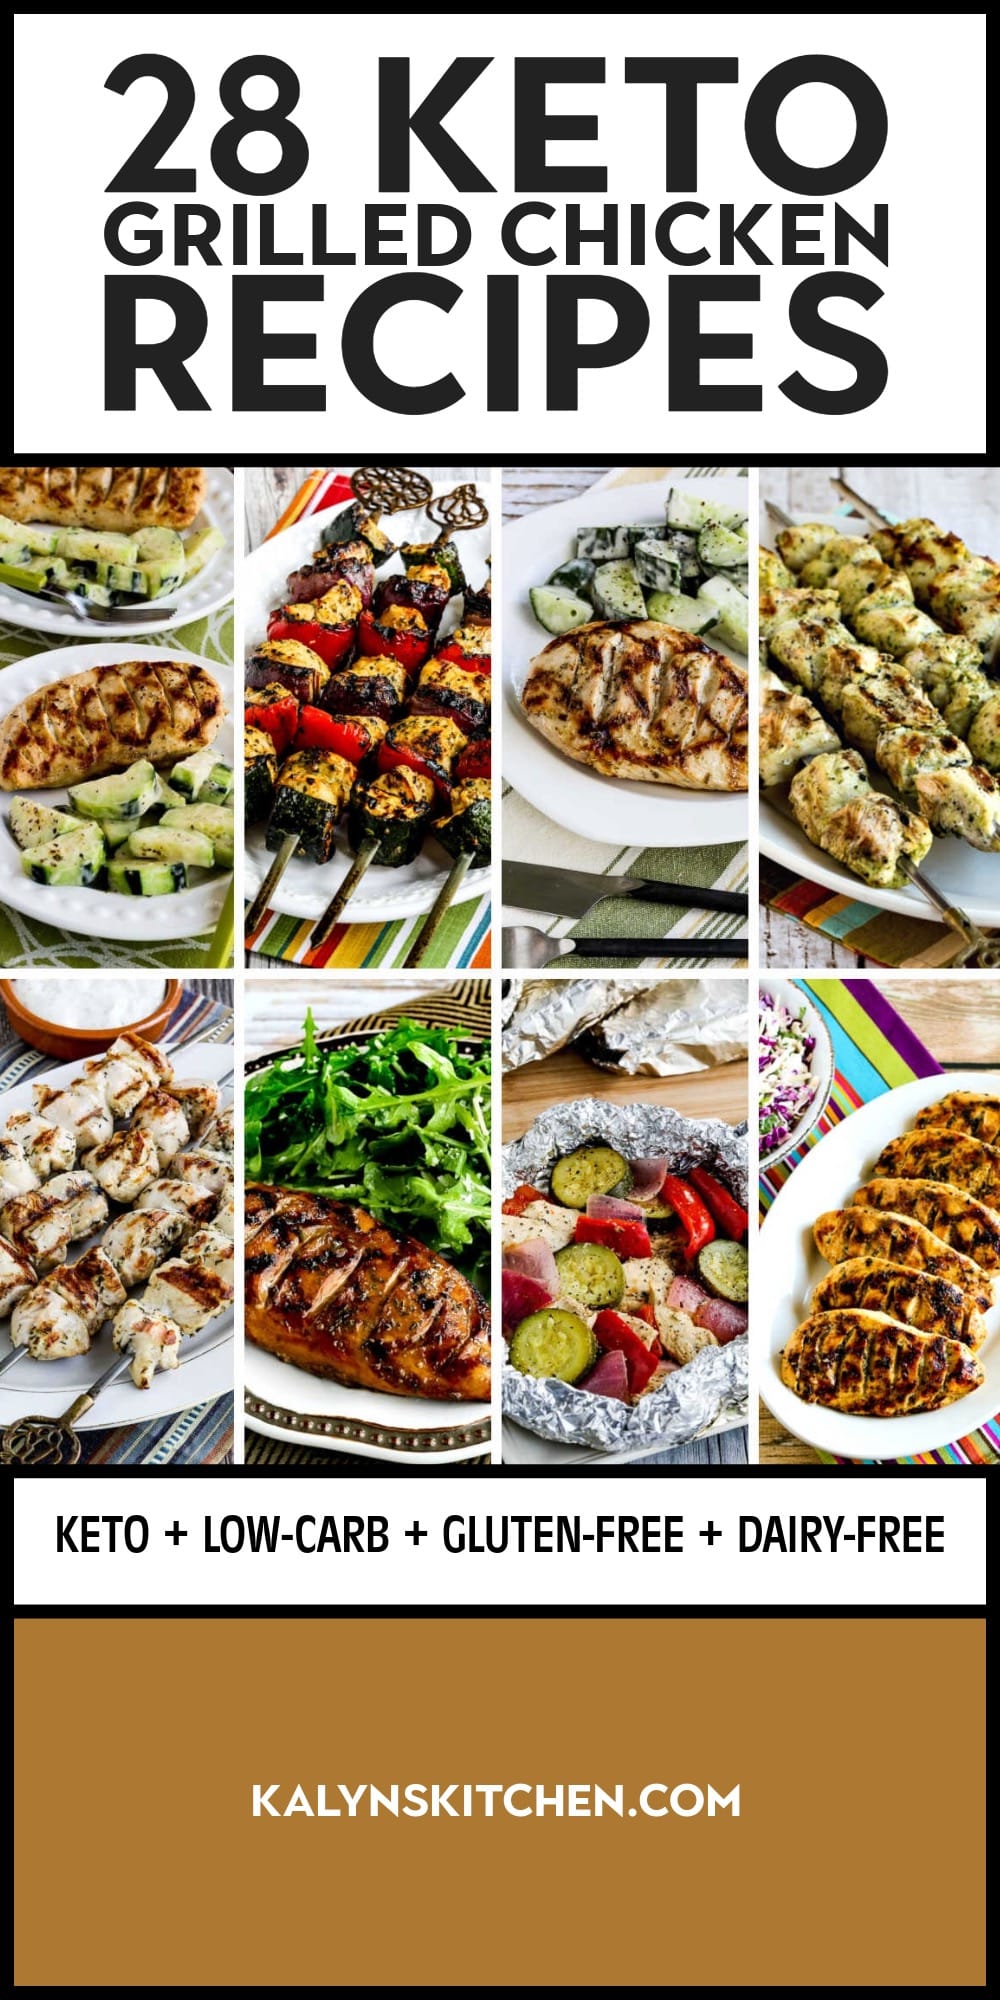 Pinterest image of 28 Keto Grilled Chicken Recipes